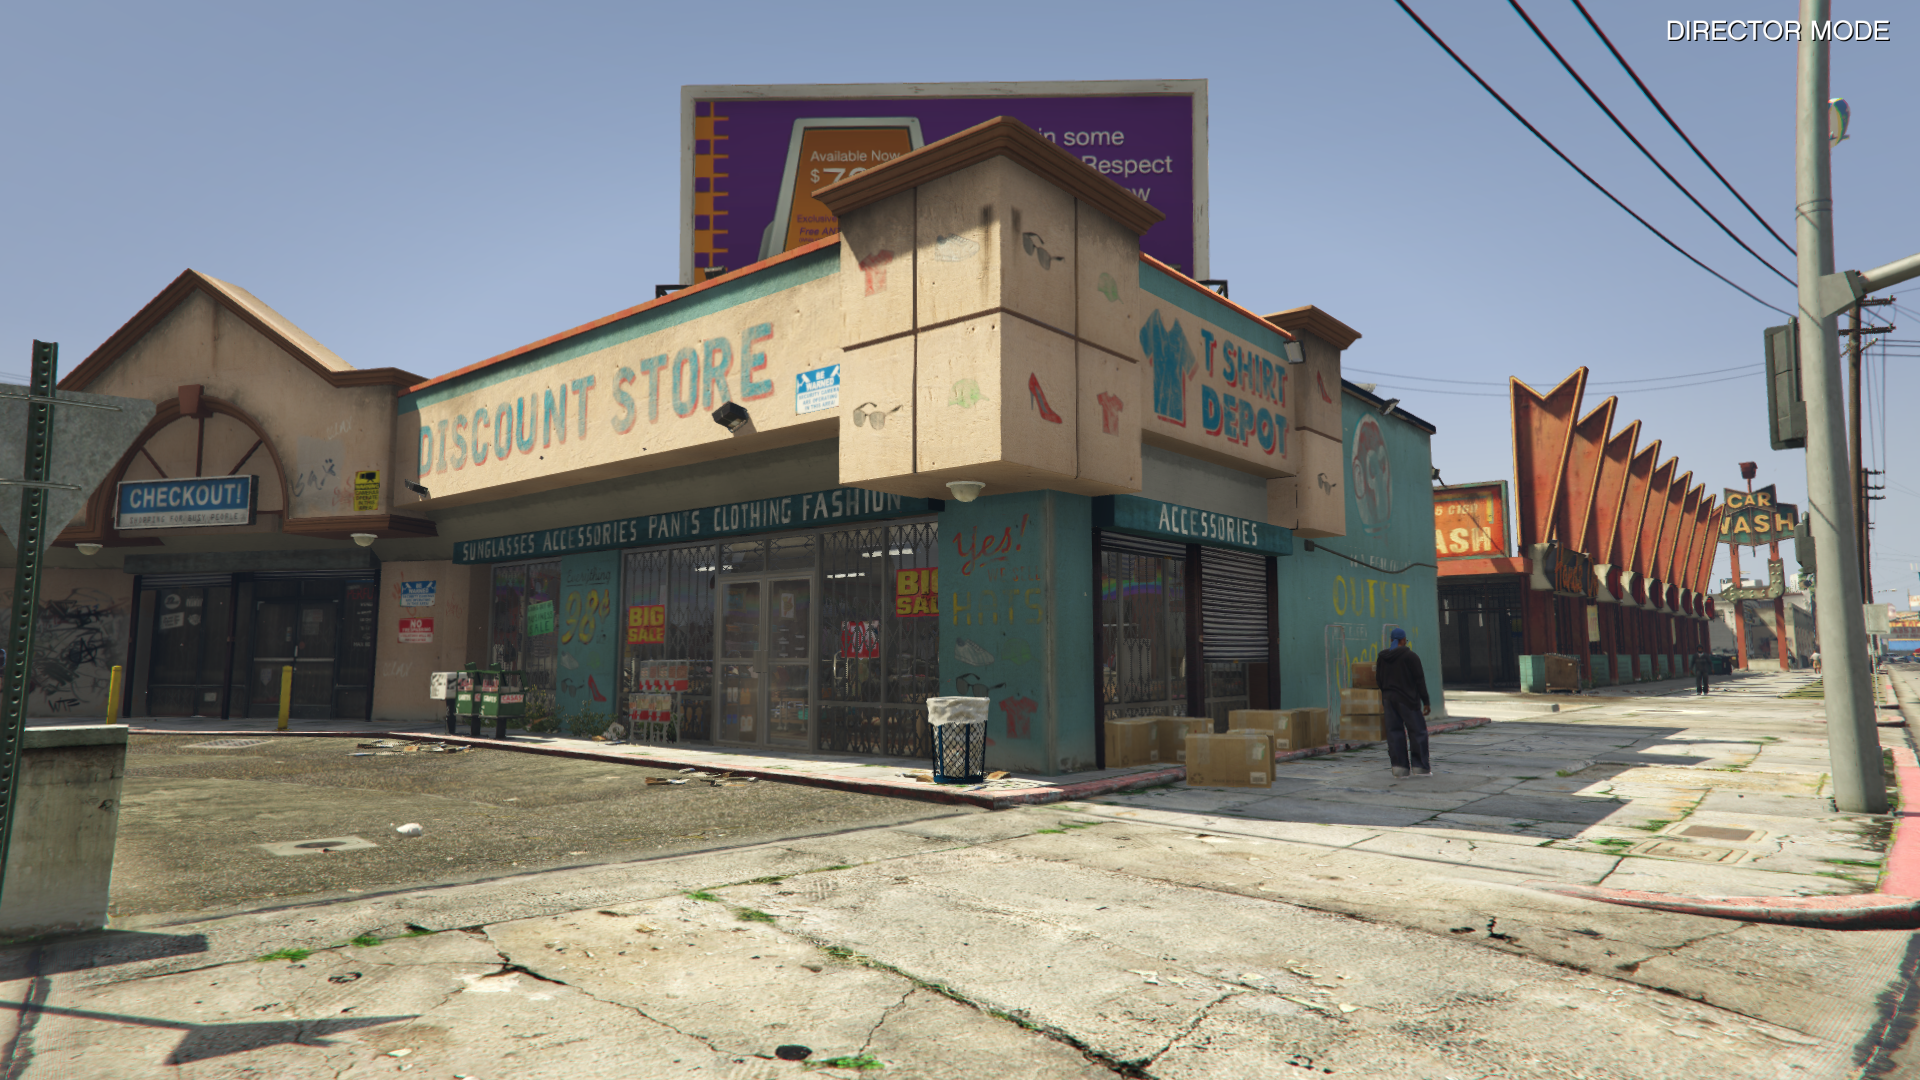 gta online clothing stores